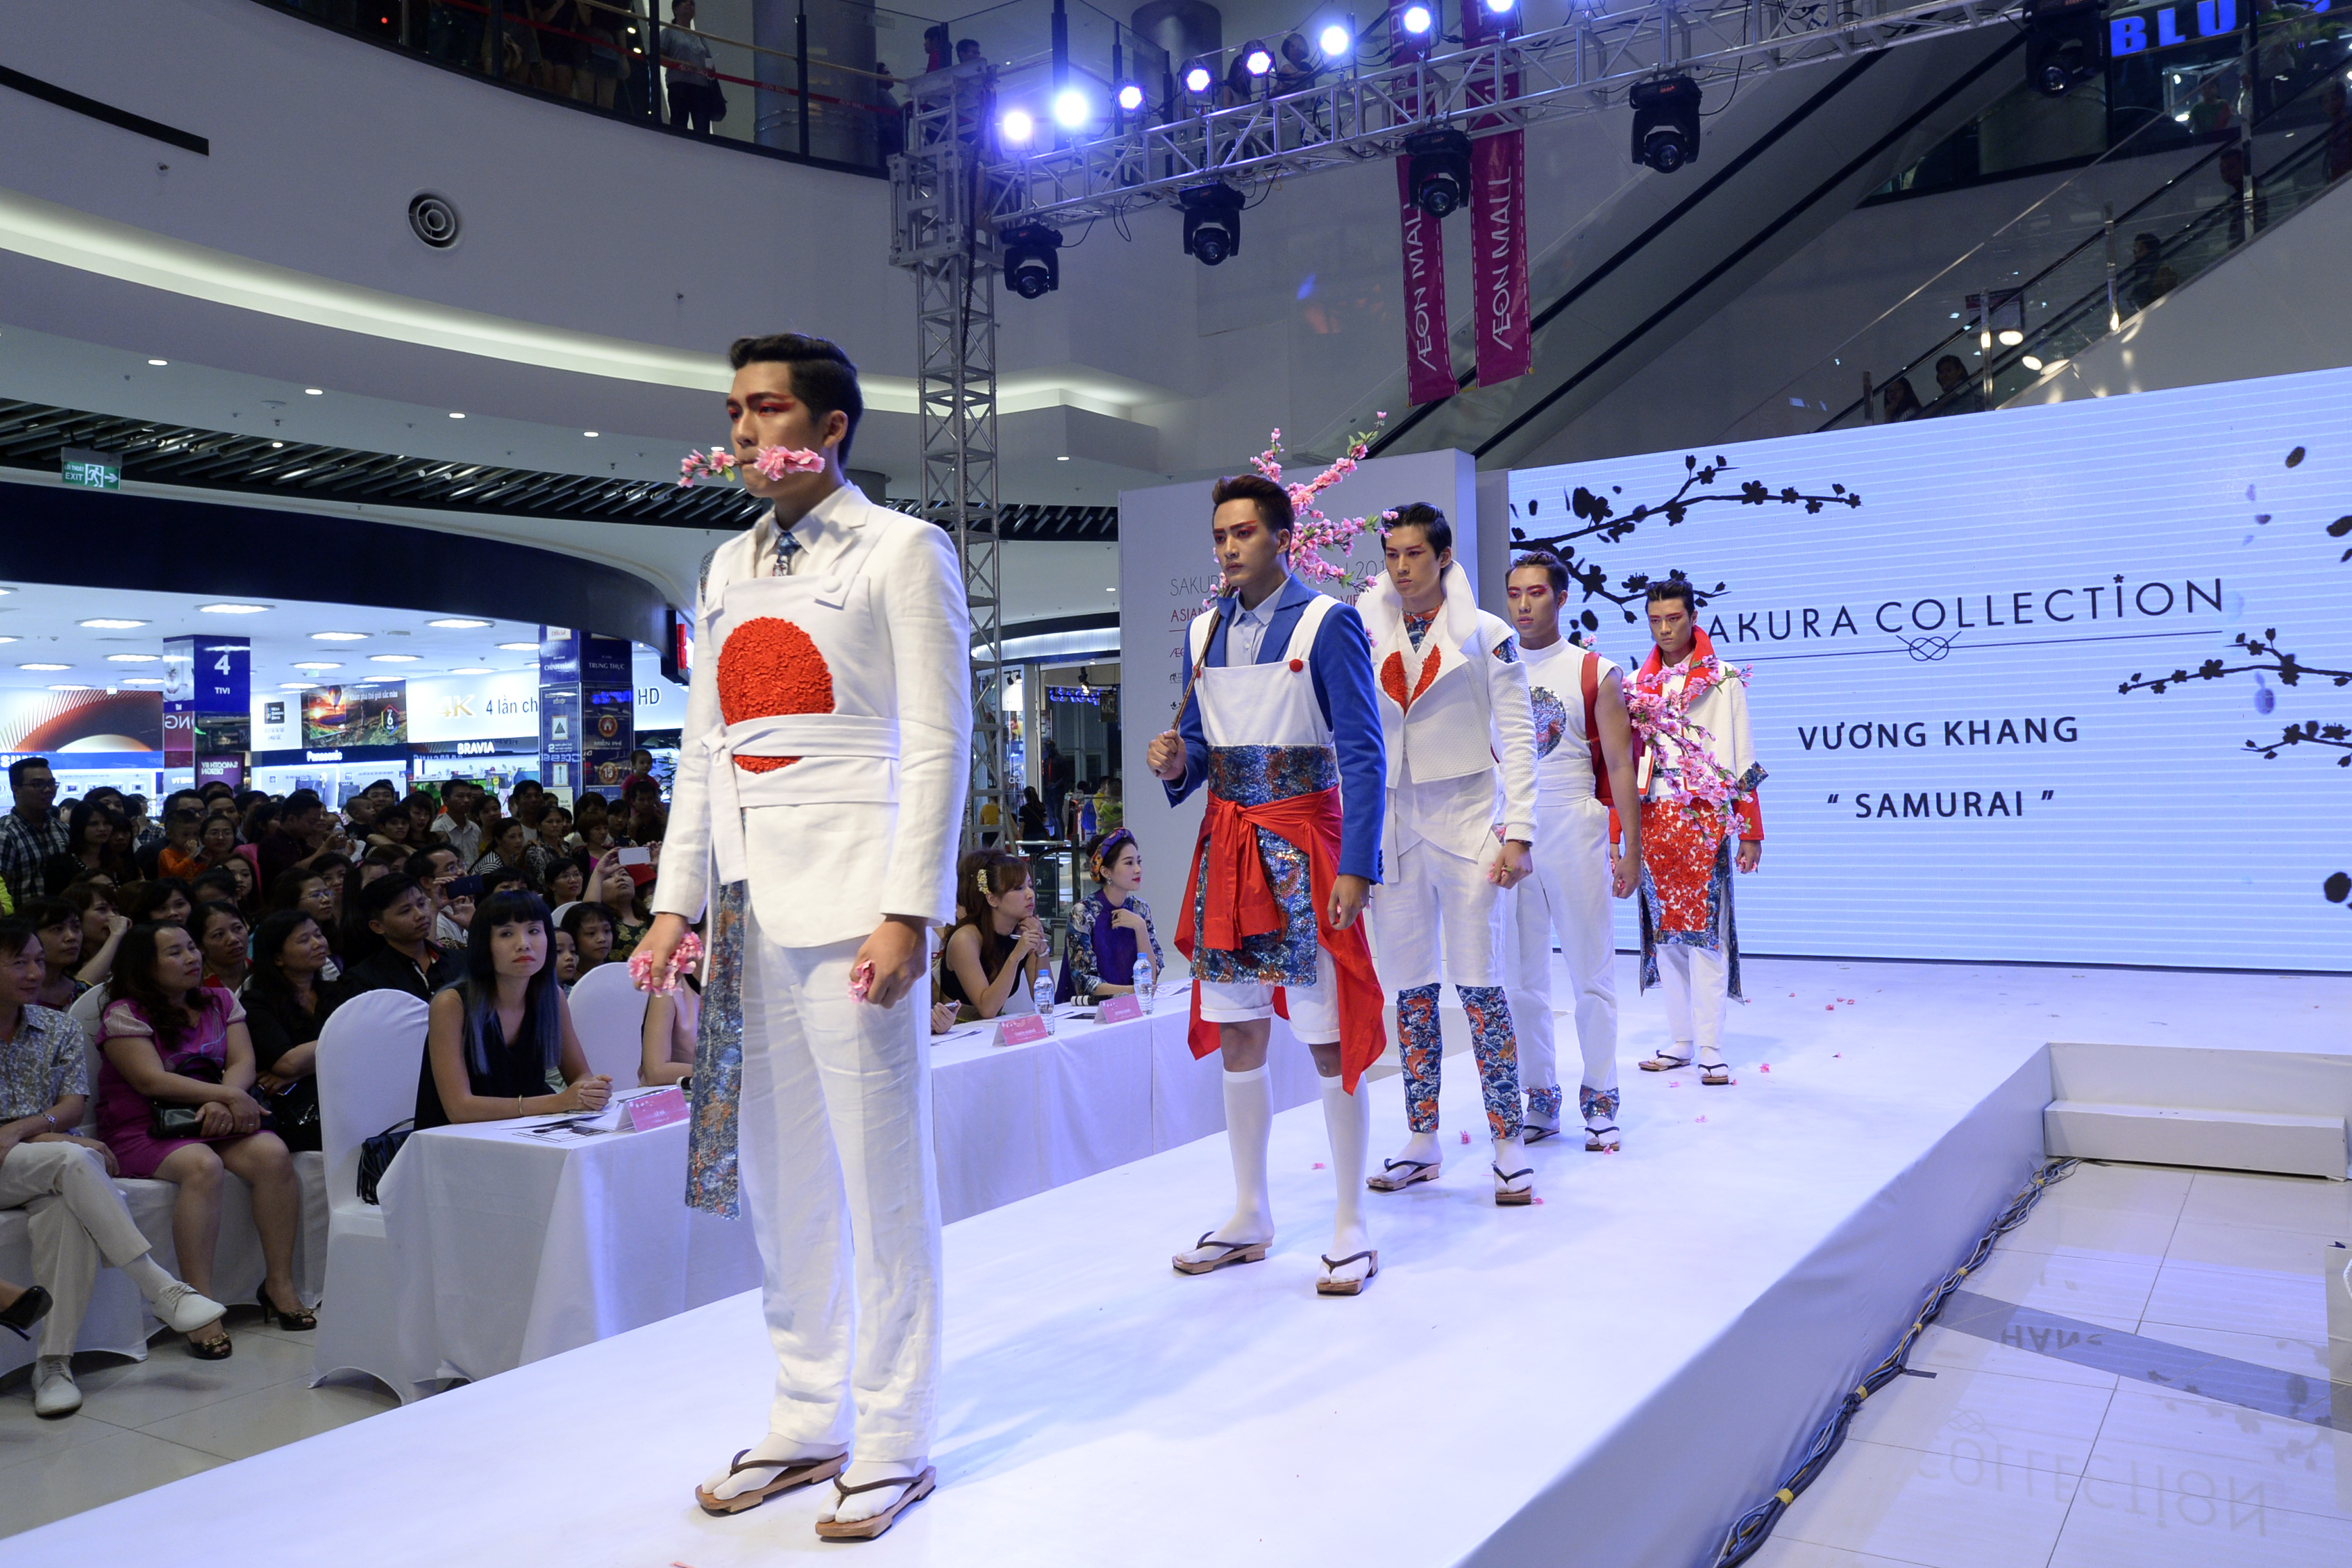 HUTECH student named as Champion the 2015’s Sakura Collection competition. 58